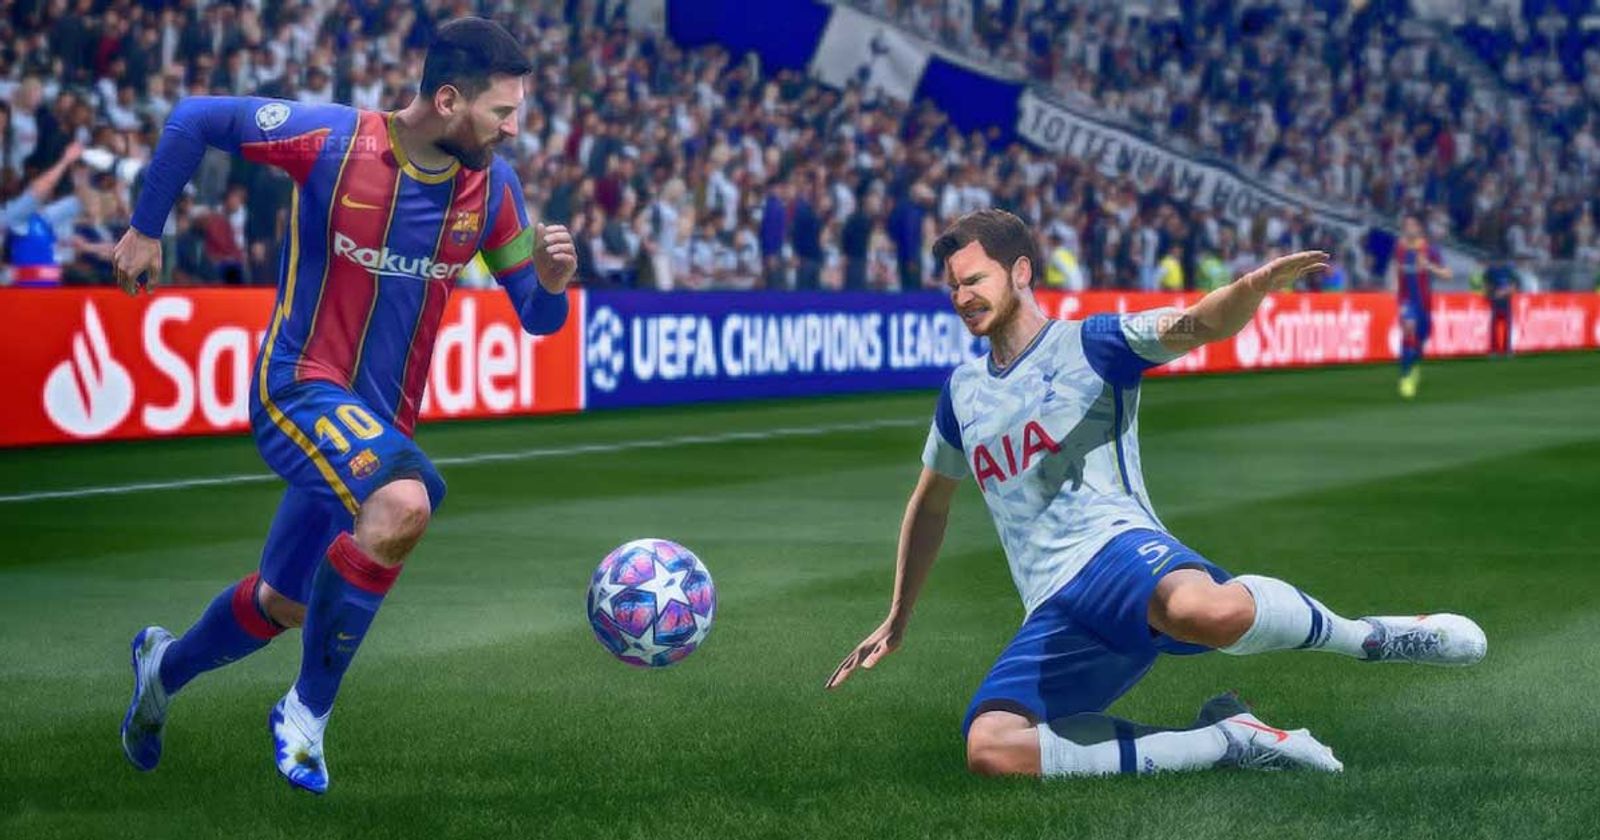 PES '21 vs FIFA '21: Why PES is a better soccer experience, by J. King, Casual Rambling